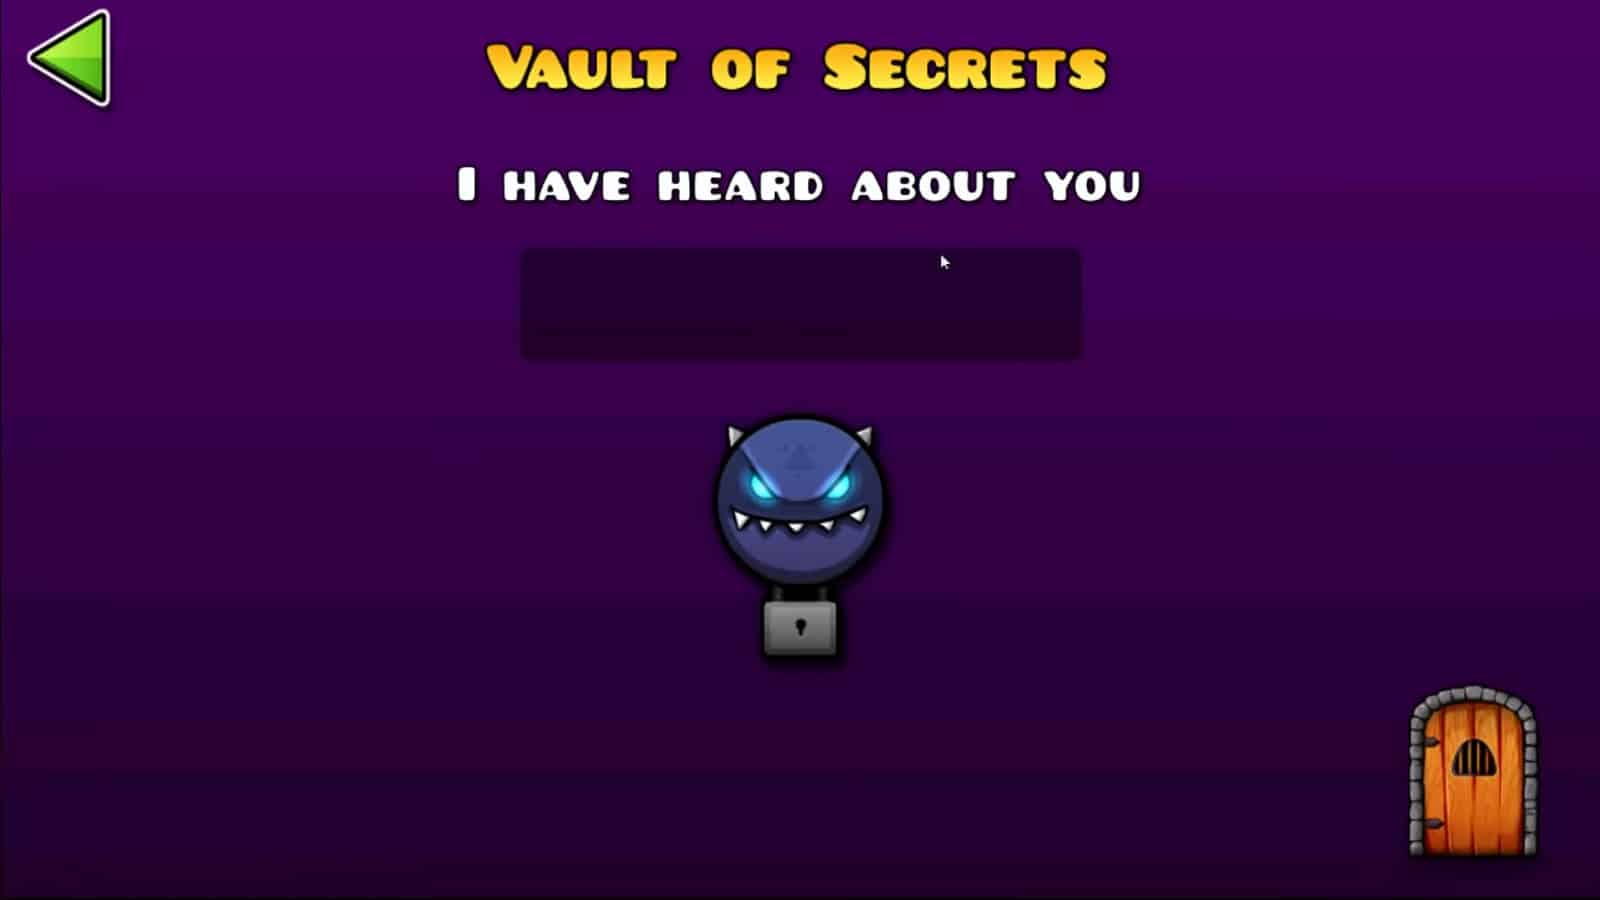 visual depiction of the vault of secrets in Geometry Dash